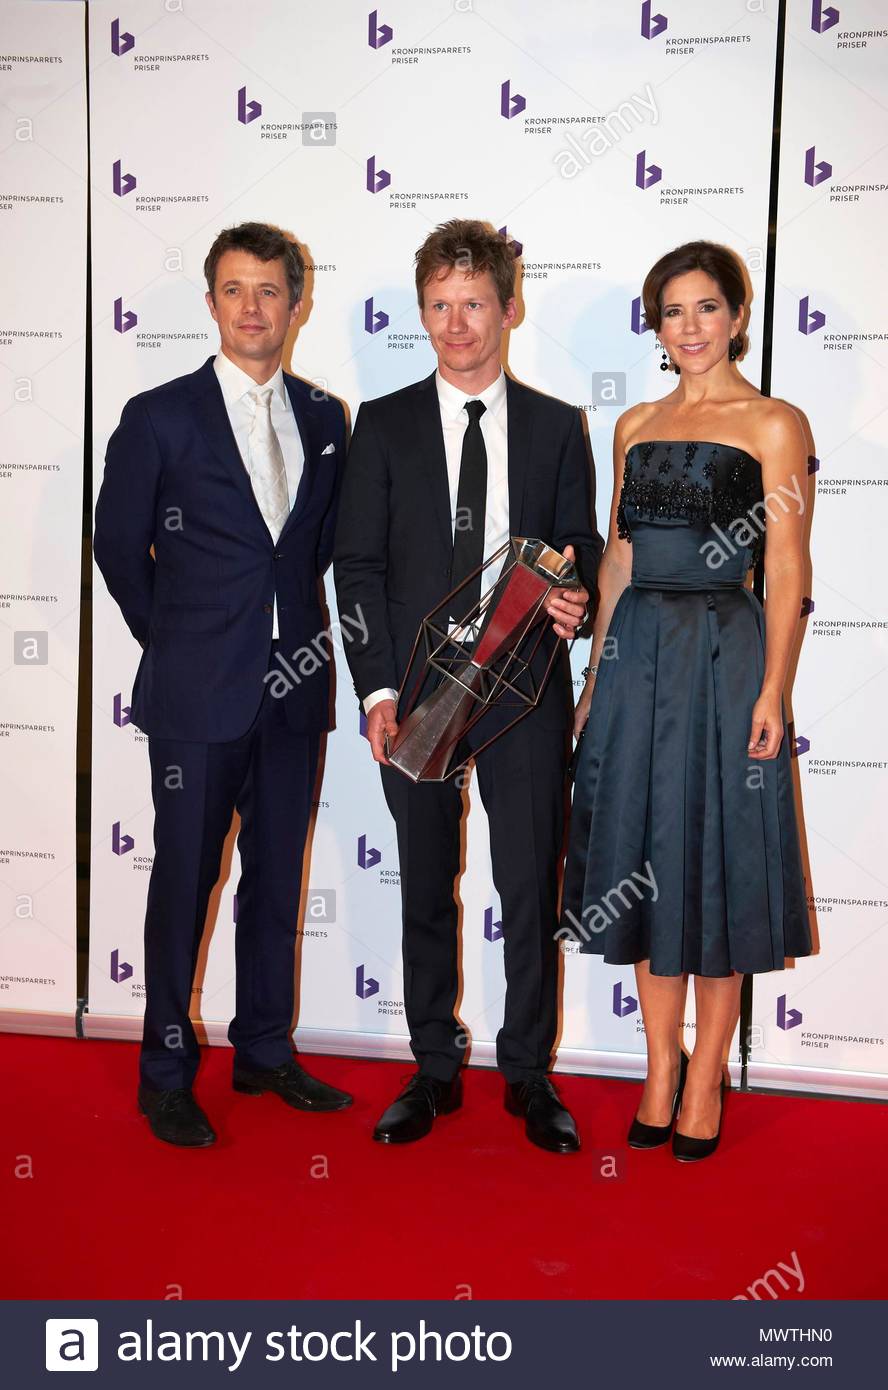 crown-prince-frederik-and-crown-princess-mary-crown-prince-frederik-and-crown-princess-mary-giving-the-crown-prince-couples-awards-in-soenderborg-crown-prince-couples-culture-award-went-to-artist-and-author-jakob-martin-strid-the-social-award-went-to-red-cross-the-stardust-prices-went-to-nive-nielsen-and-bjarke-mogensen-code-03624ll-MWTHN0.jpg